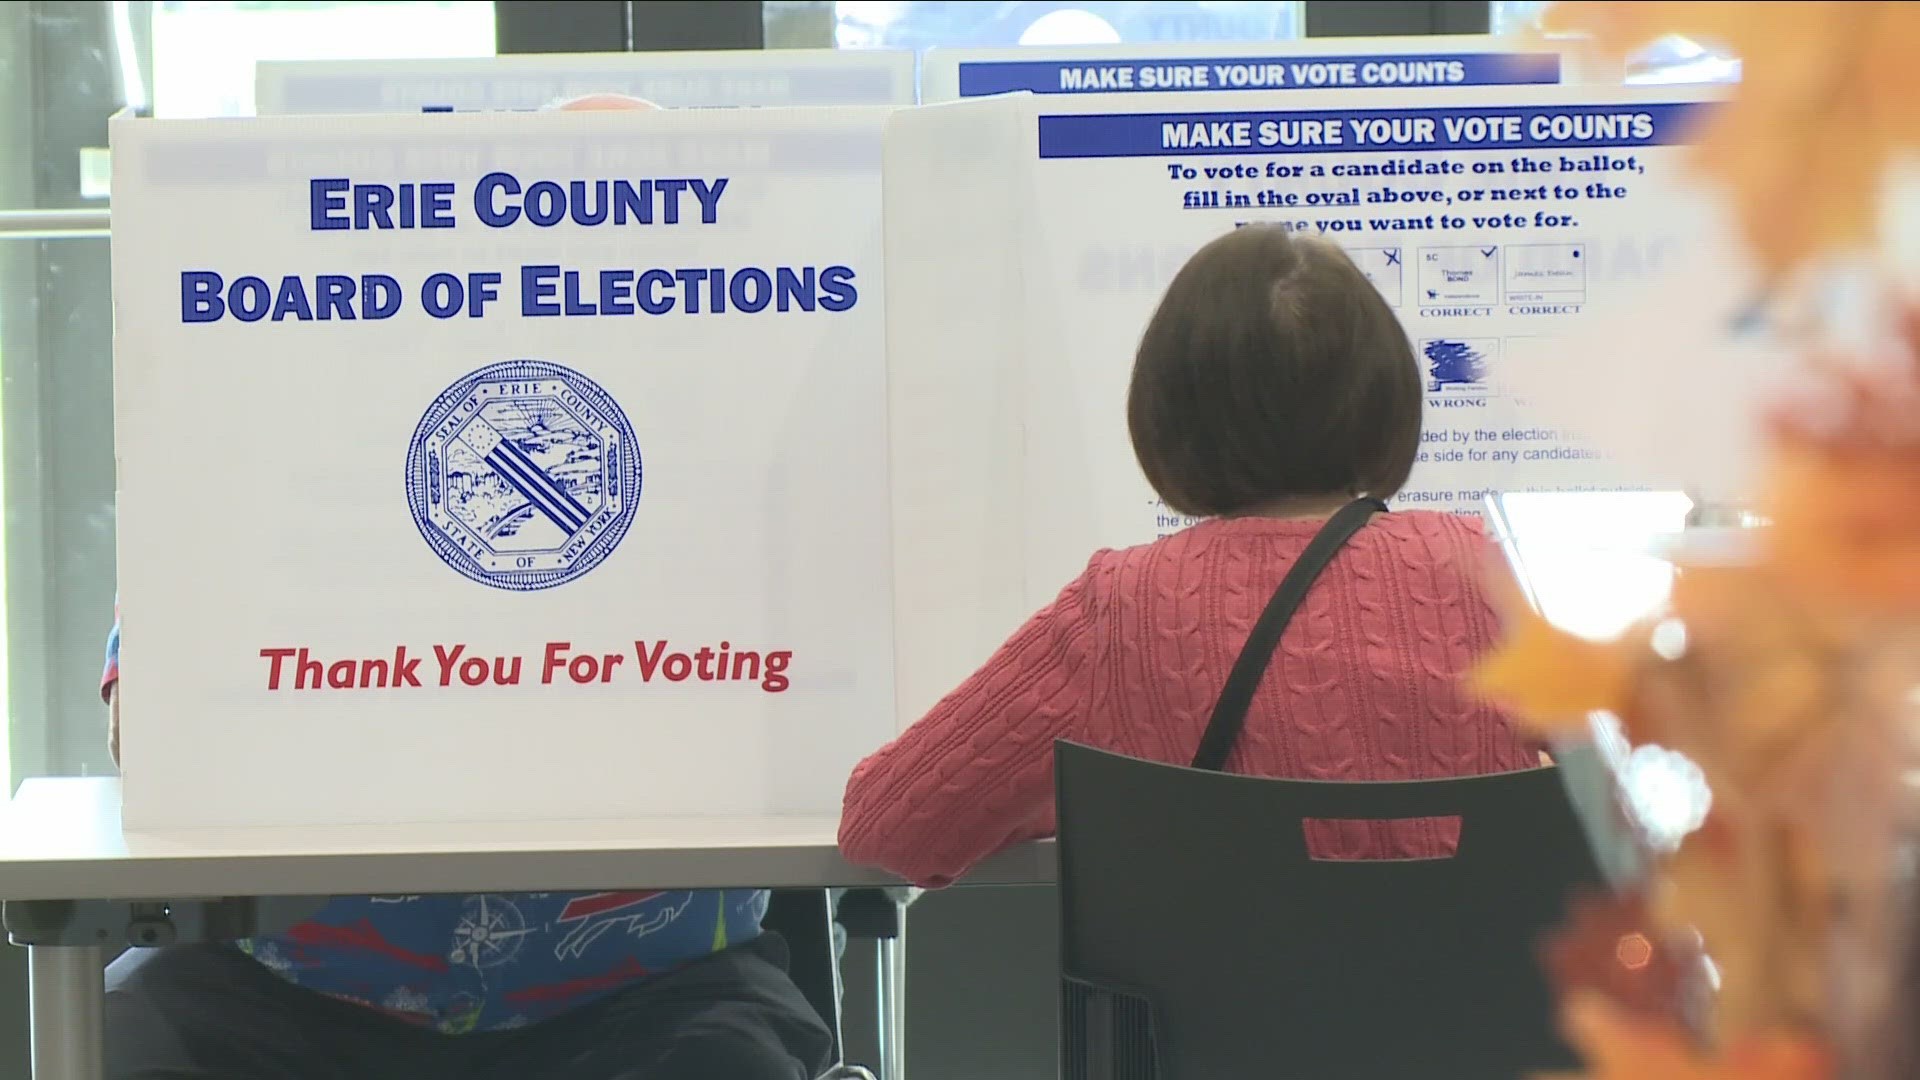 Expanding voters rights in New York state